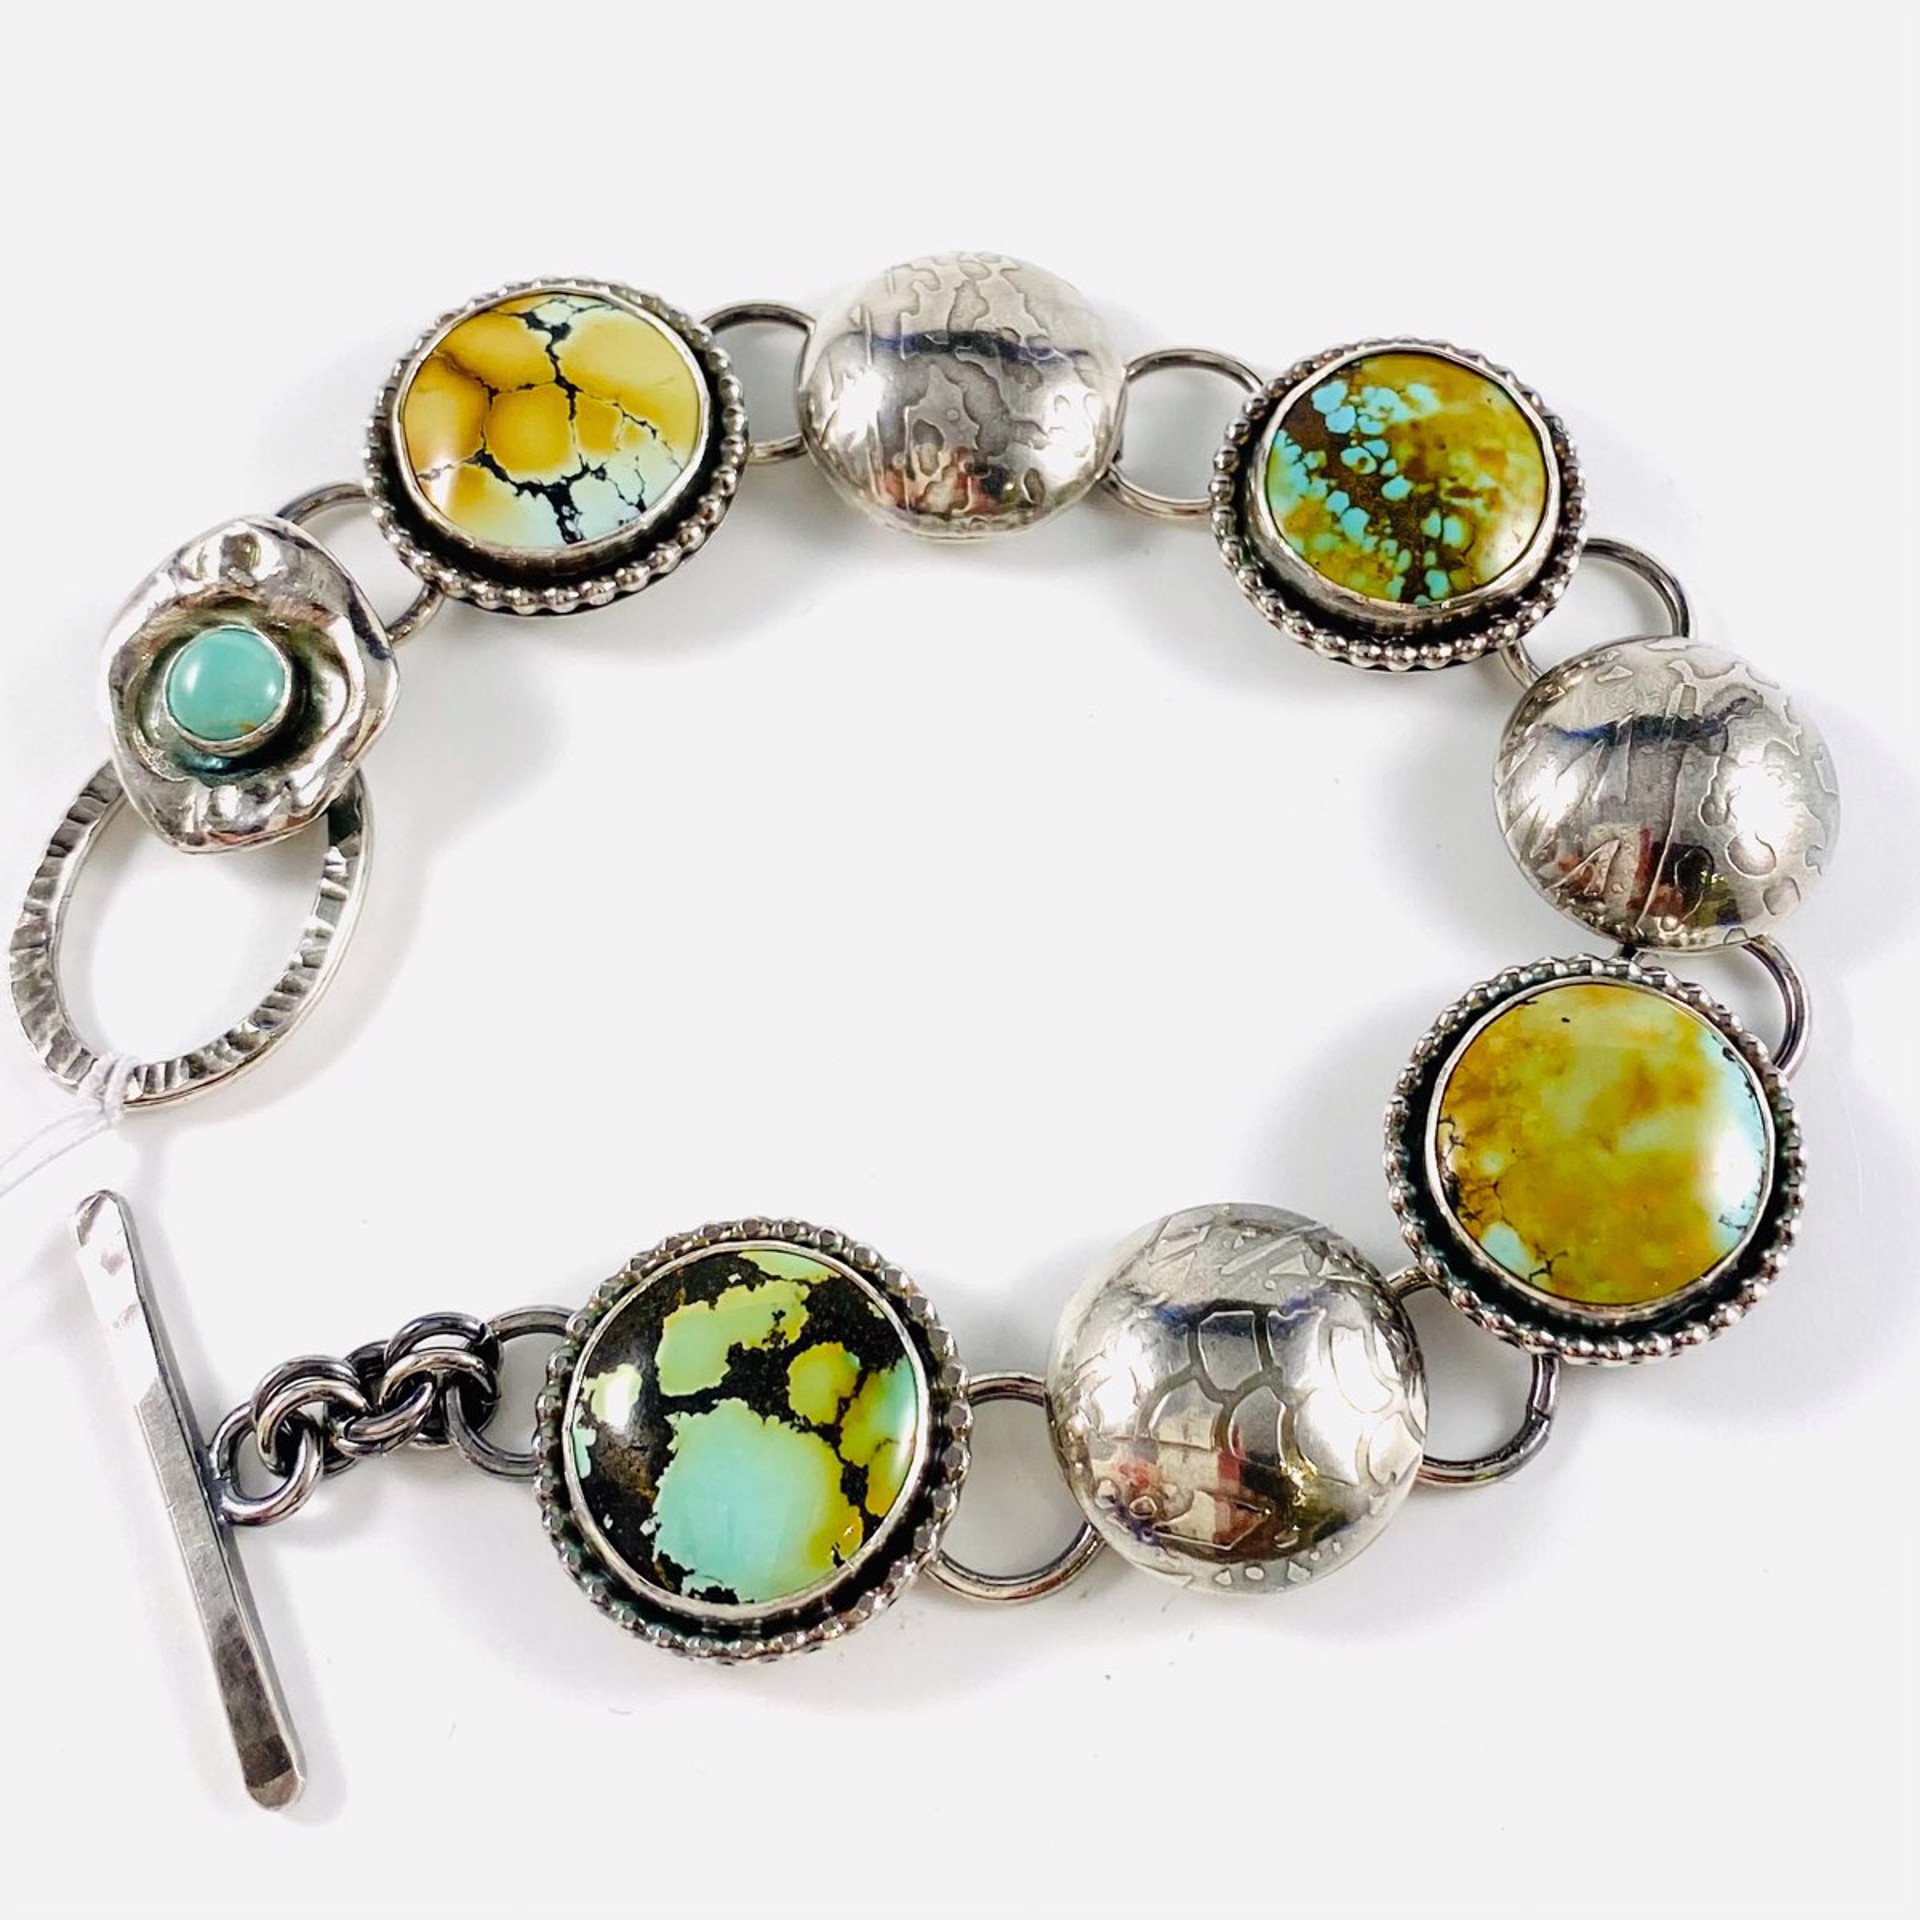 AB22-79 Four Treasure Mountain Turquoise Rounds with bead bezel and Three Silver Dome spacers Link Bracelet by Anne Bivens